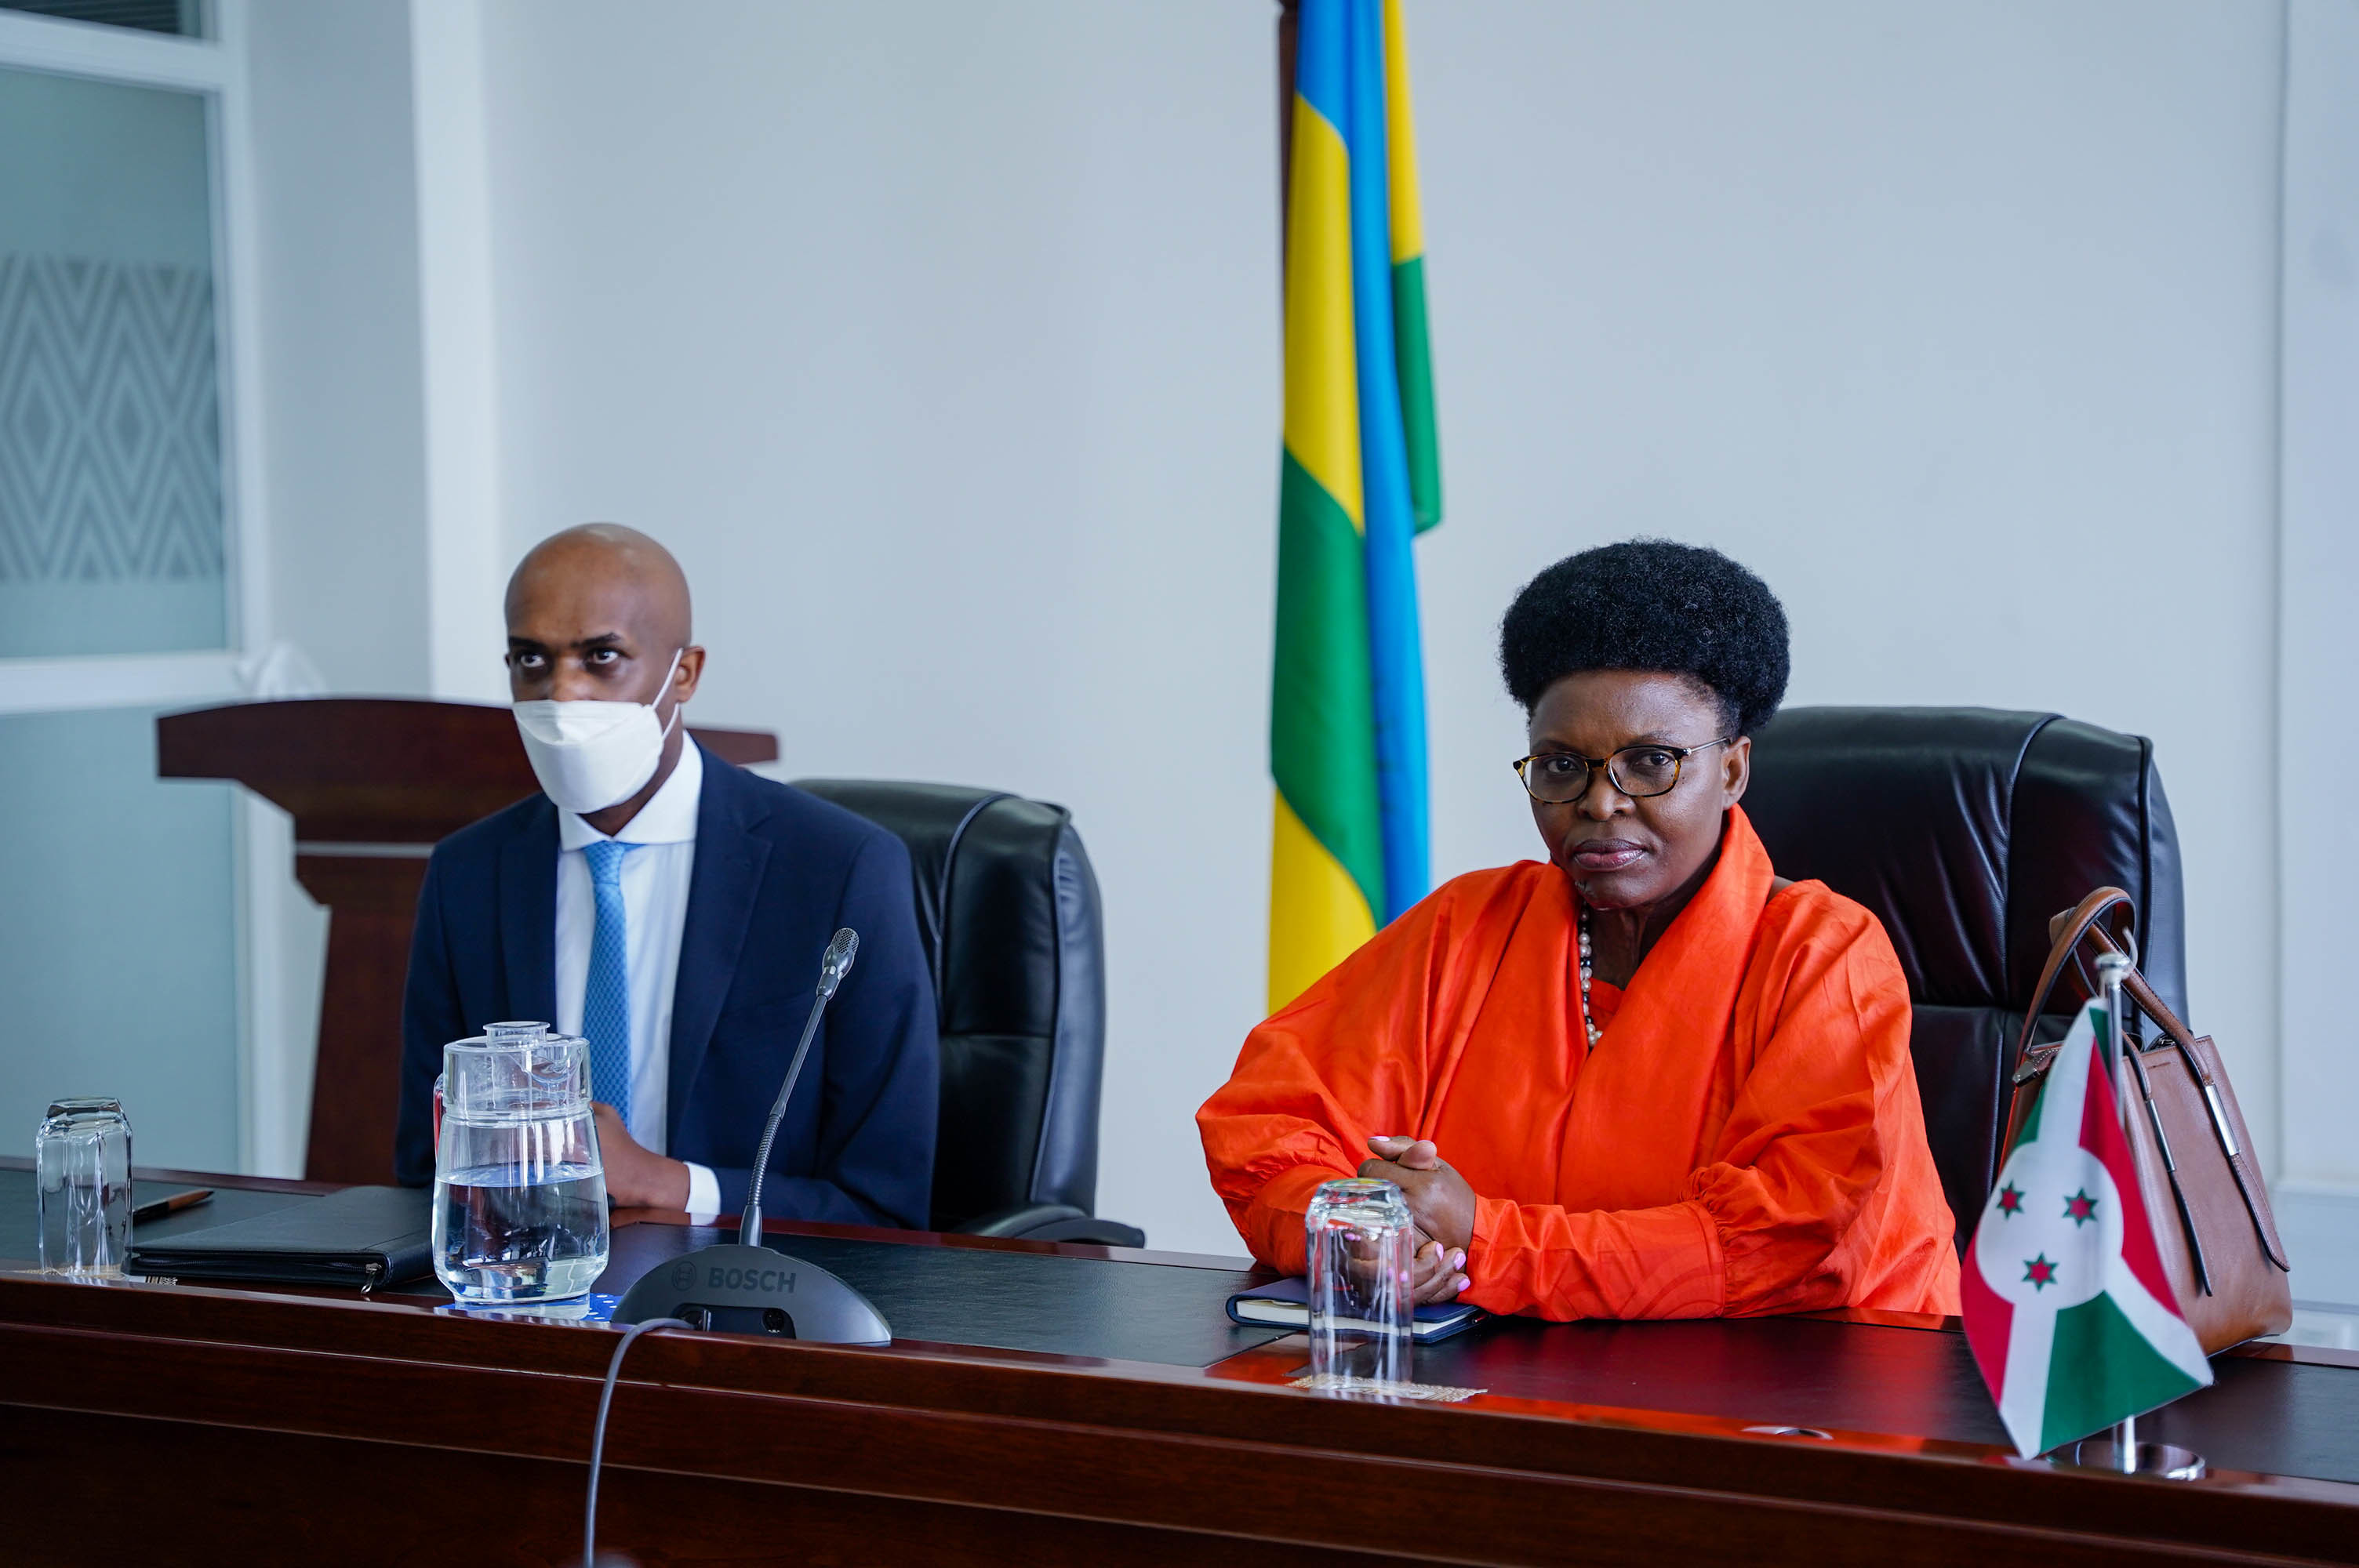 Minister of Justice  Emmanuel Ugirashebuja and Domina Banyankibona during a meeting in Kigali on February 25. She leads a Burundian delegation on  a working visit aimed on the continued efforts to normalize ties. / Dan Nsengiyumva